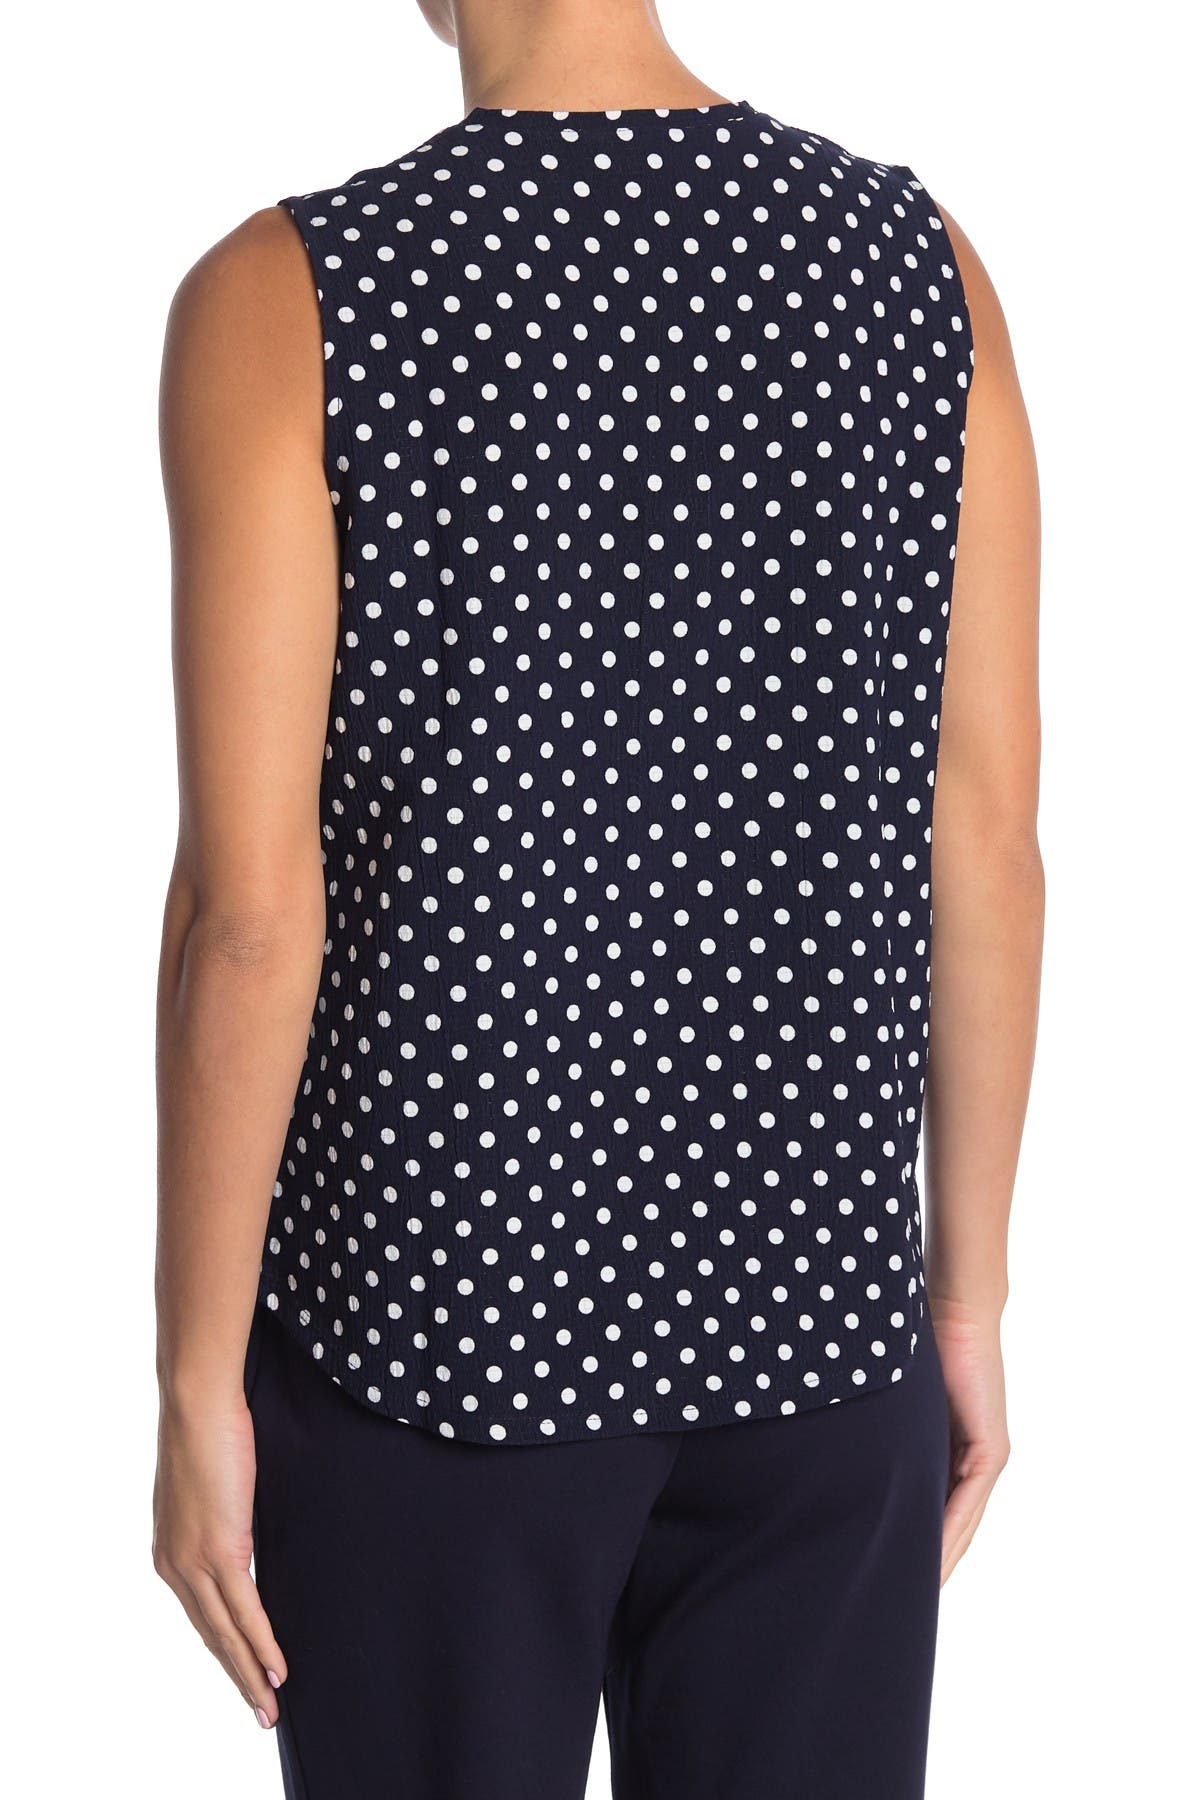 Adrianna Papell Sleeveless Textured Knit Dot Print Top In Open Miscellaneous23